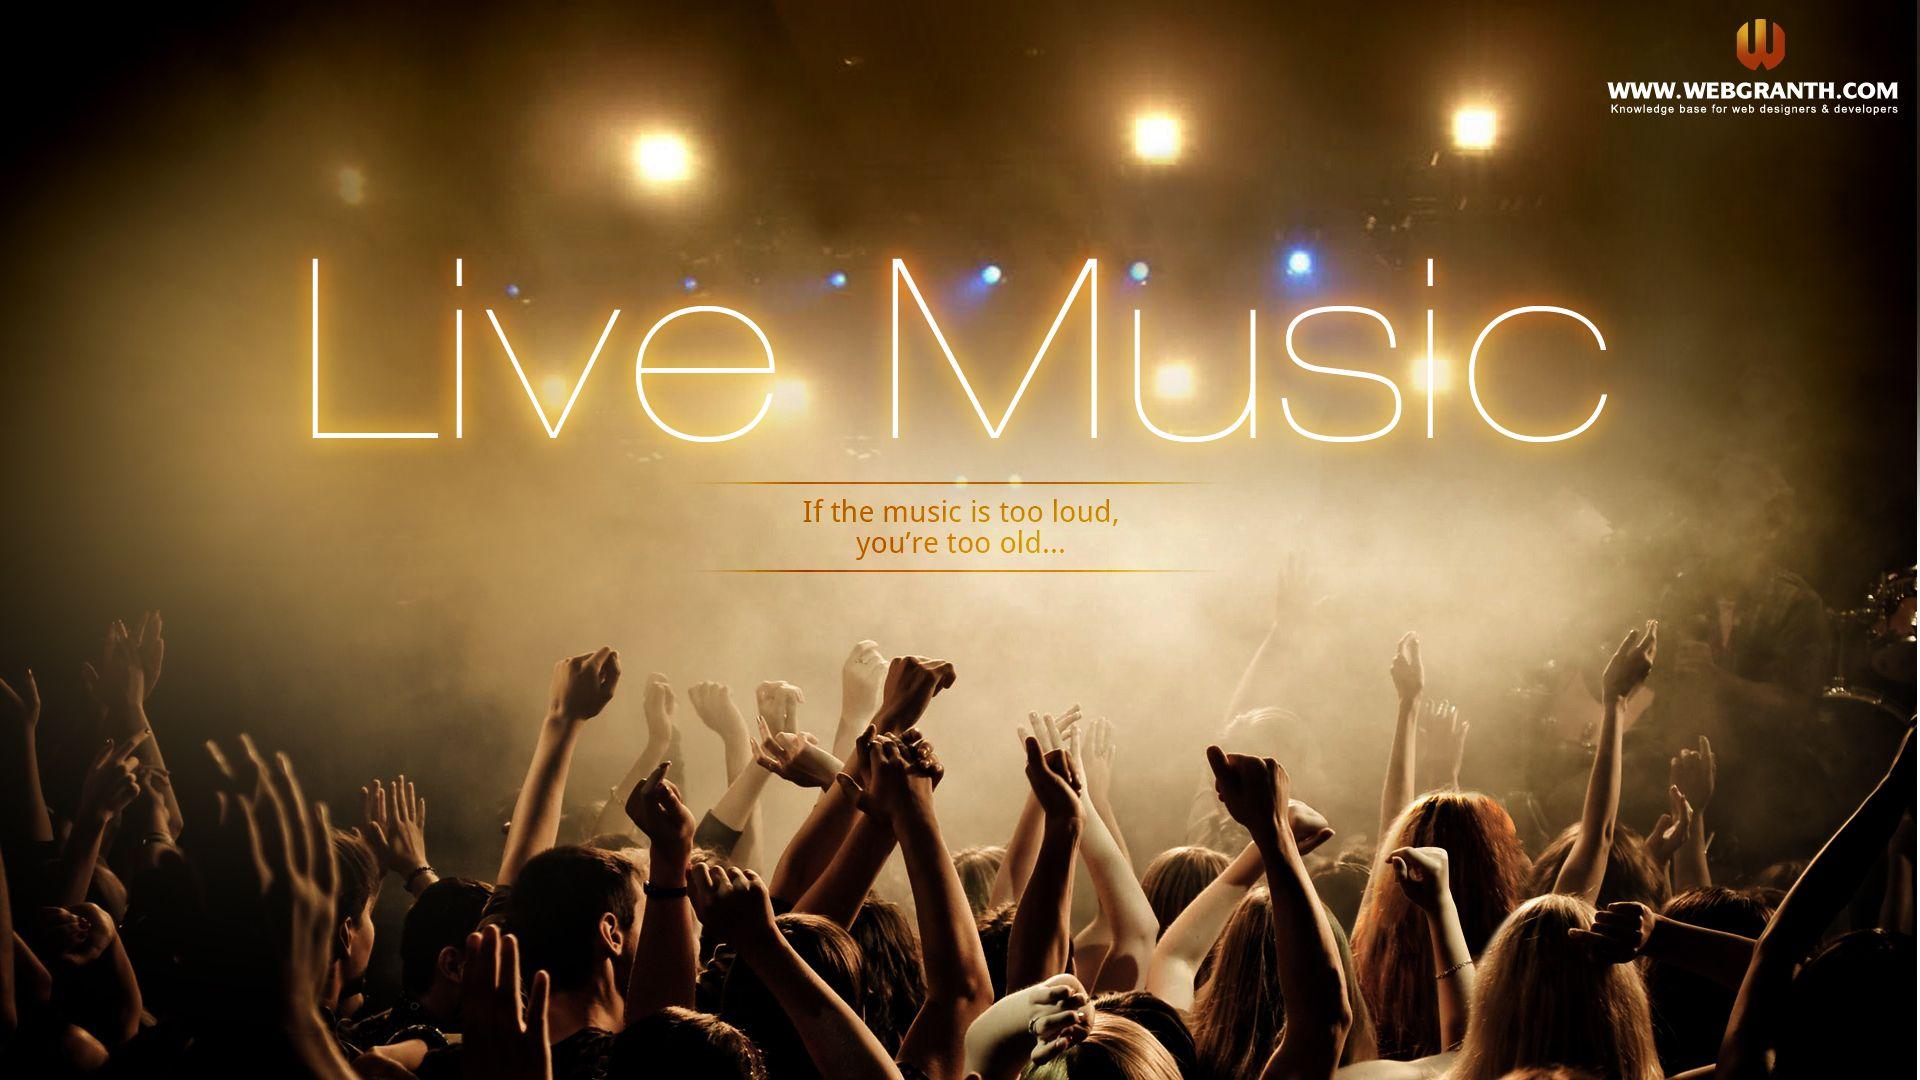 Live Music Wallpapers - Wallpaper Cave